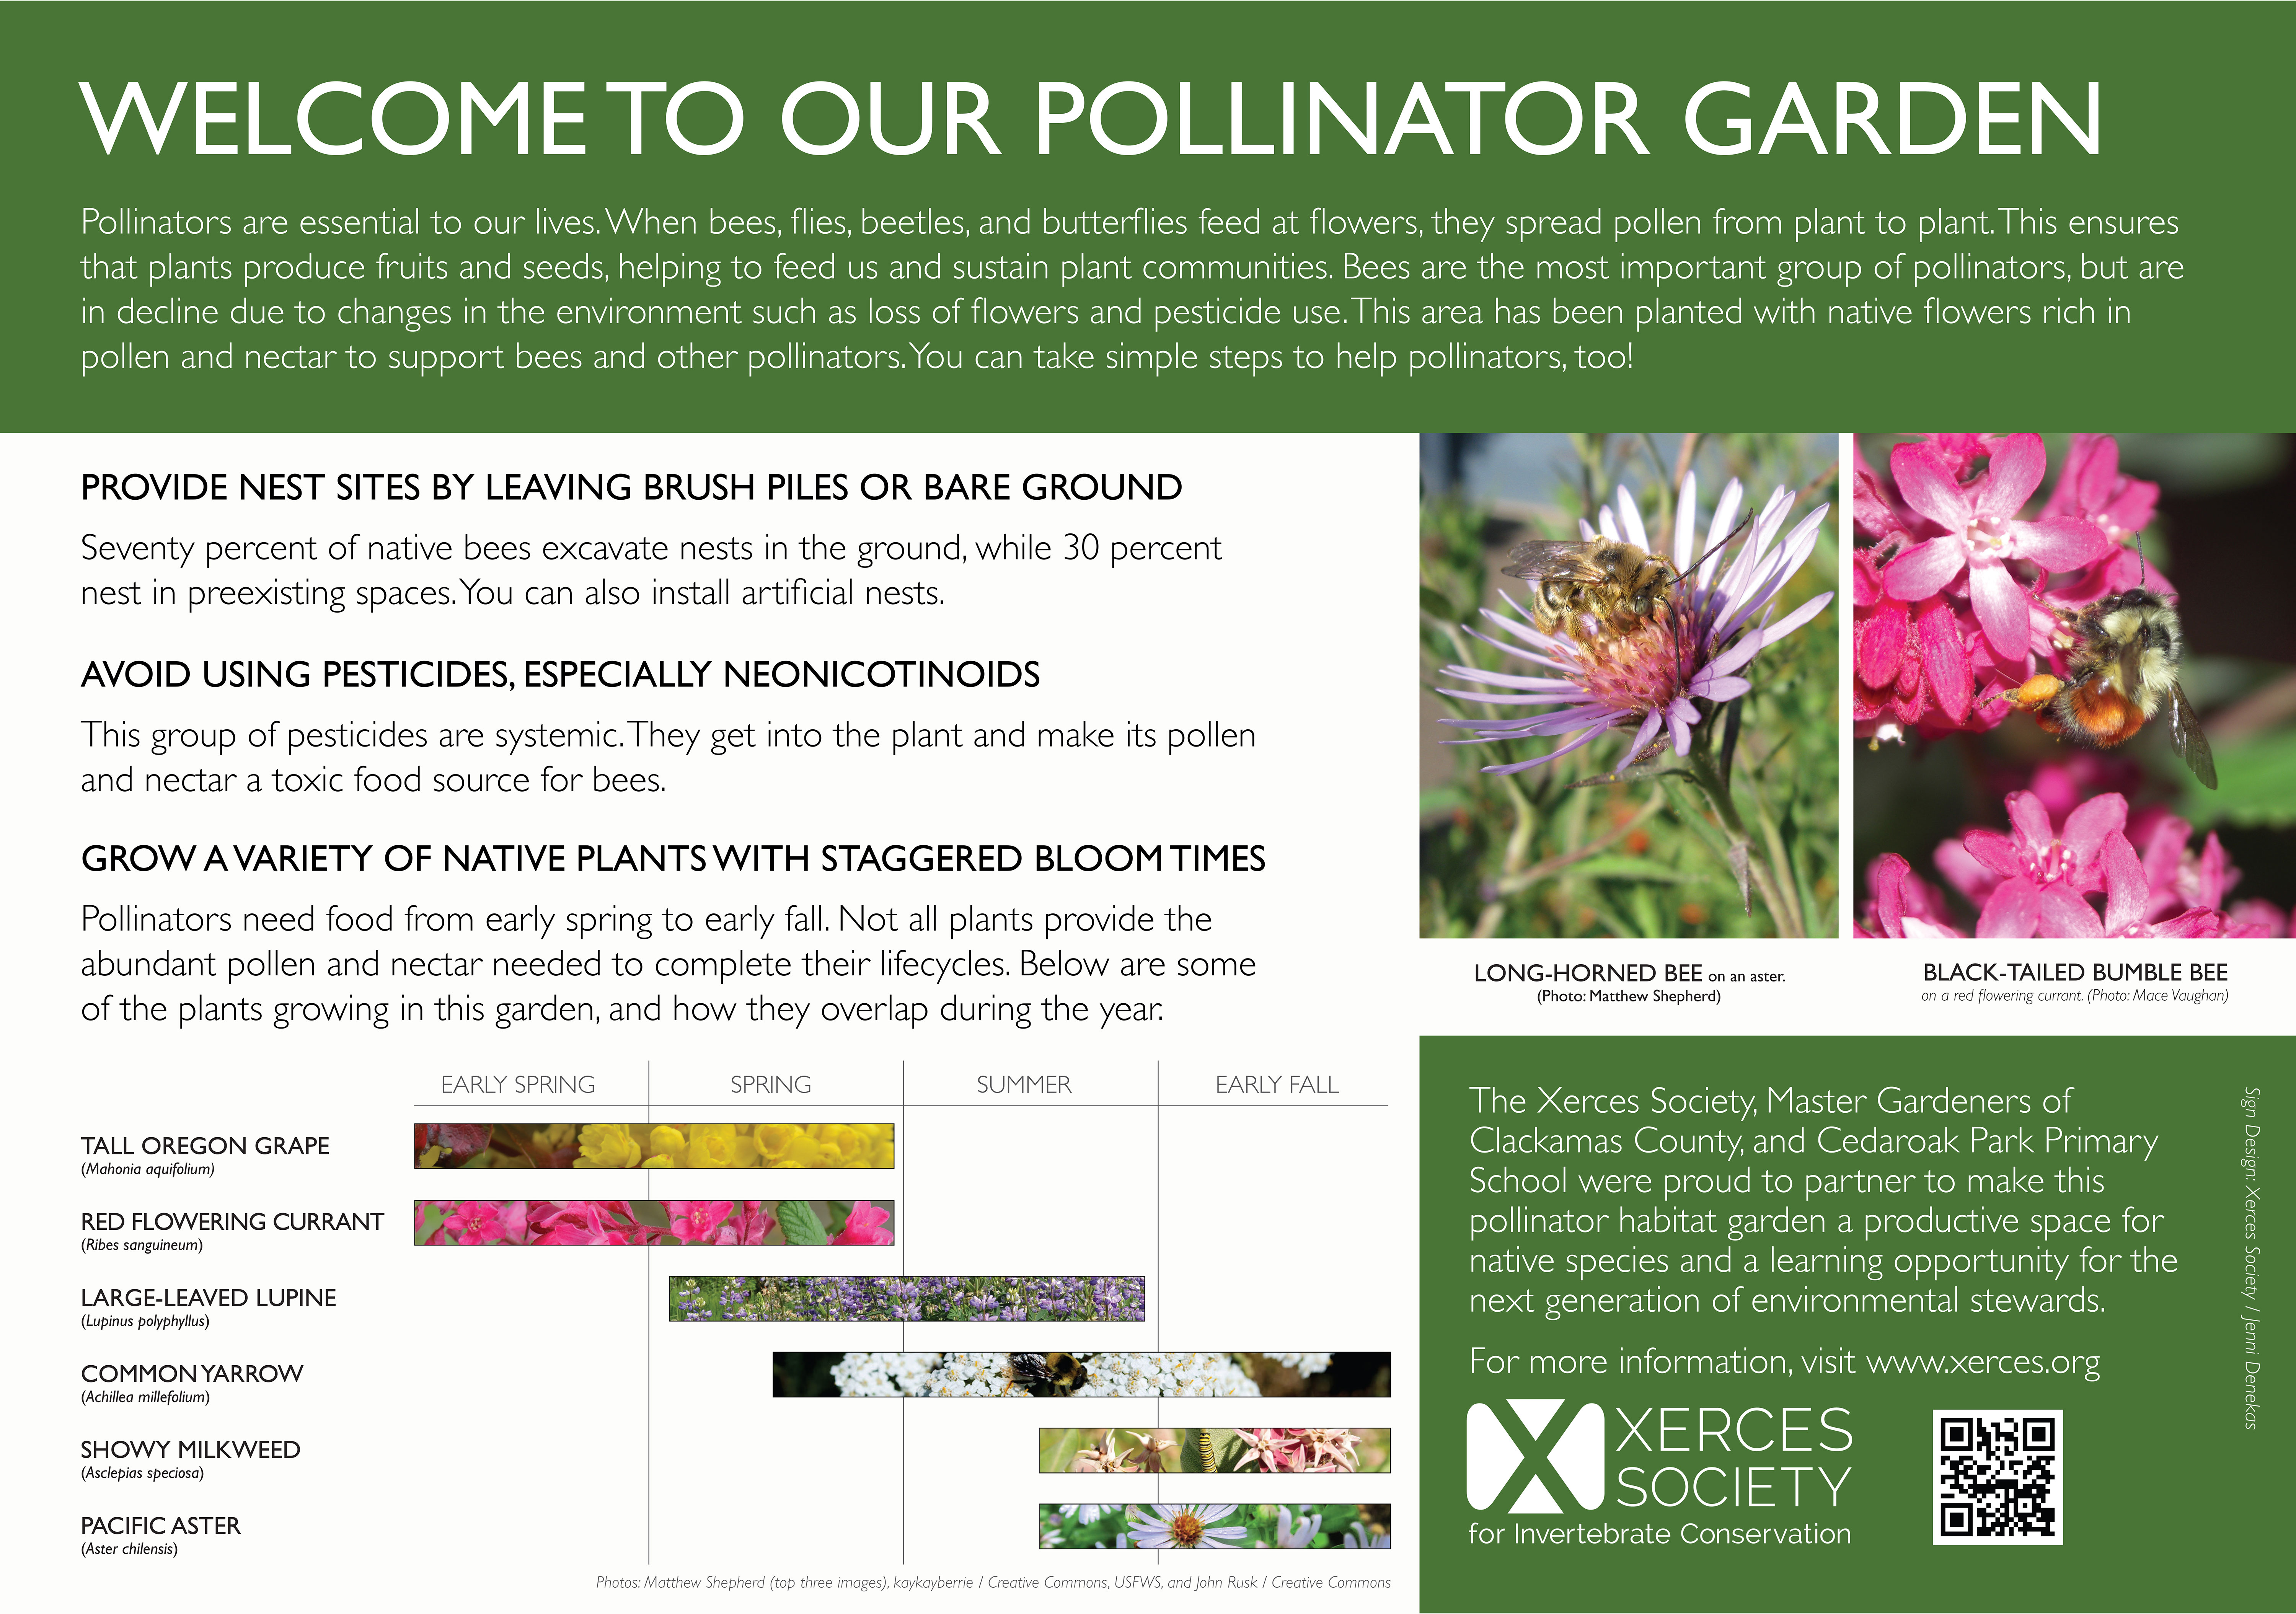 An interpretive panel welcomes visitors to a pollinator garden and provides tips on gardening for pollinators.